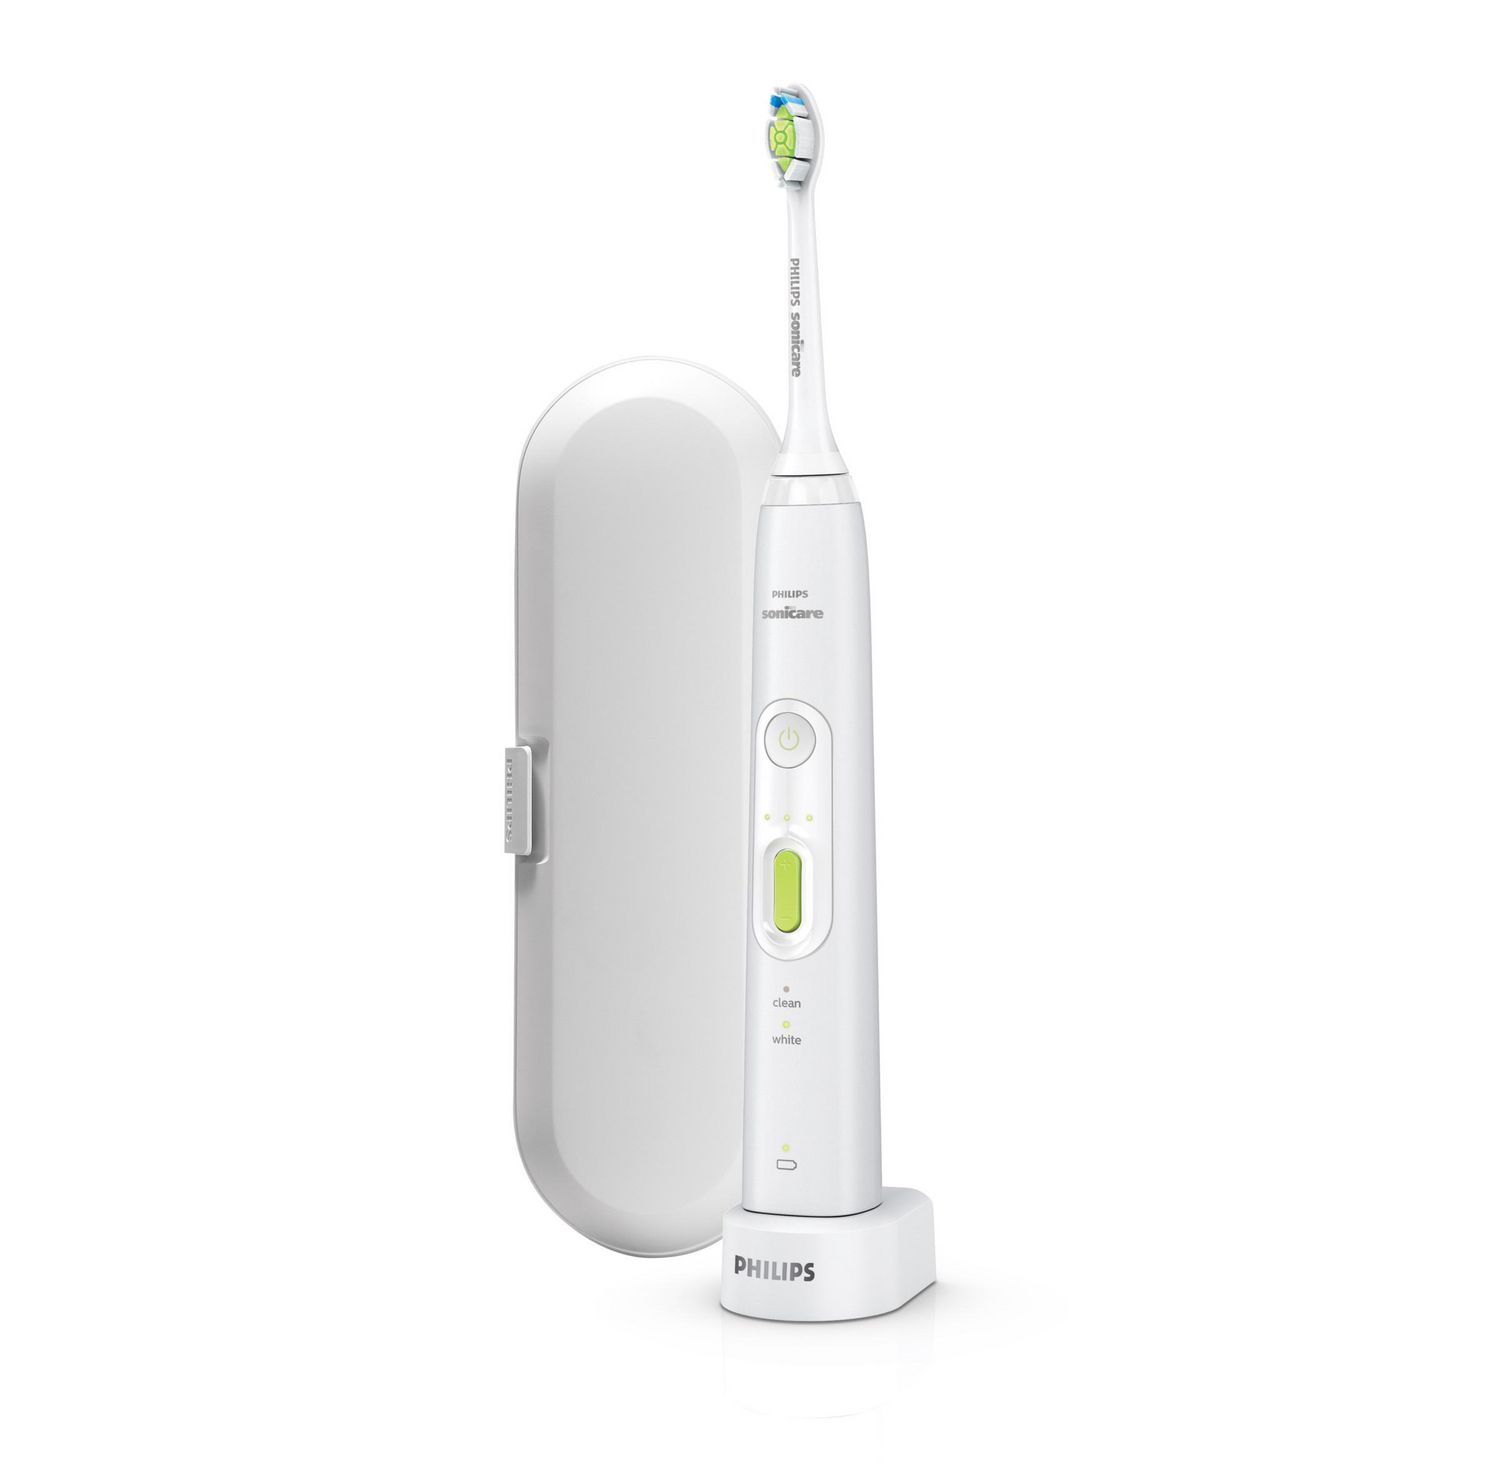 [Walmart] Philips Sonicare HealthyWhite + electric toothbrush, $29 in-stores, YMMV